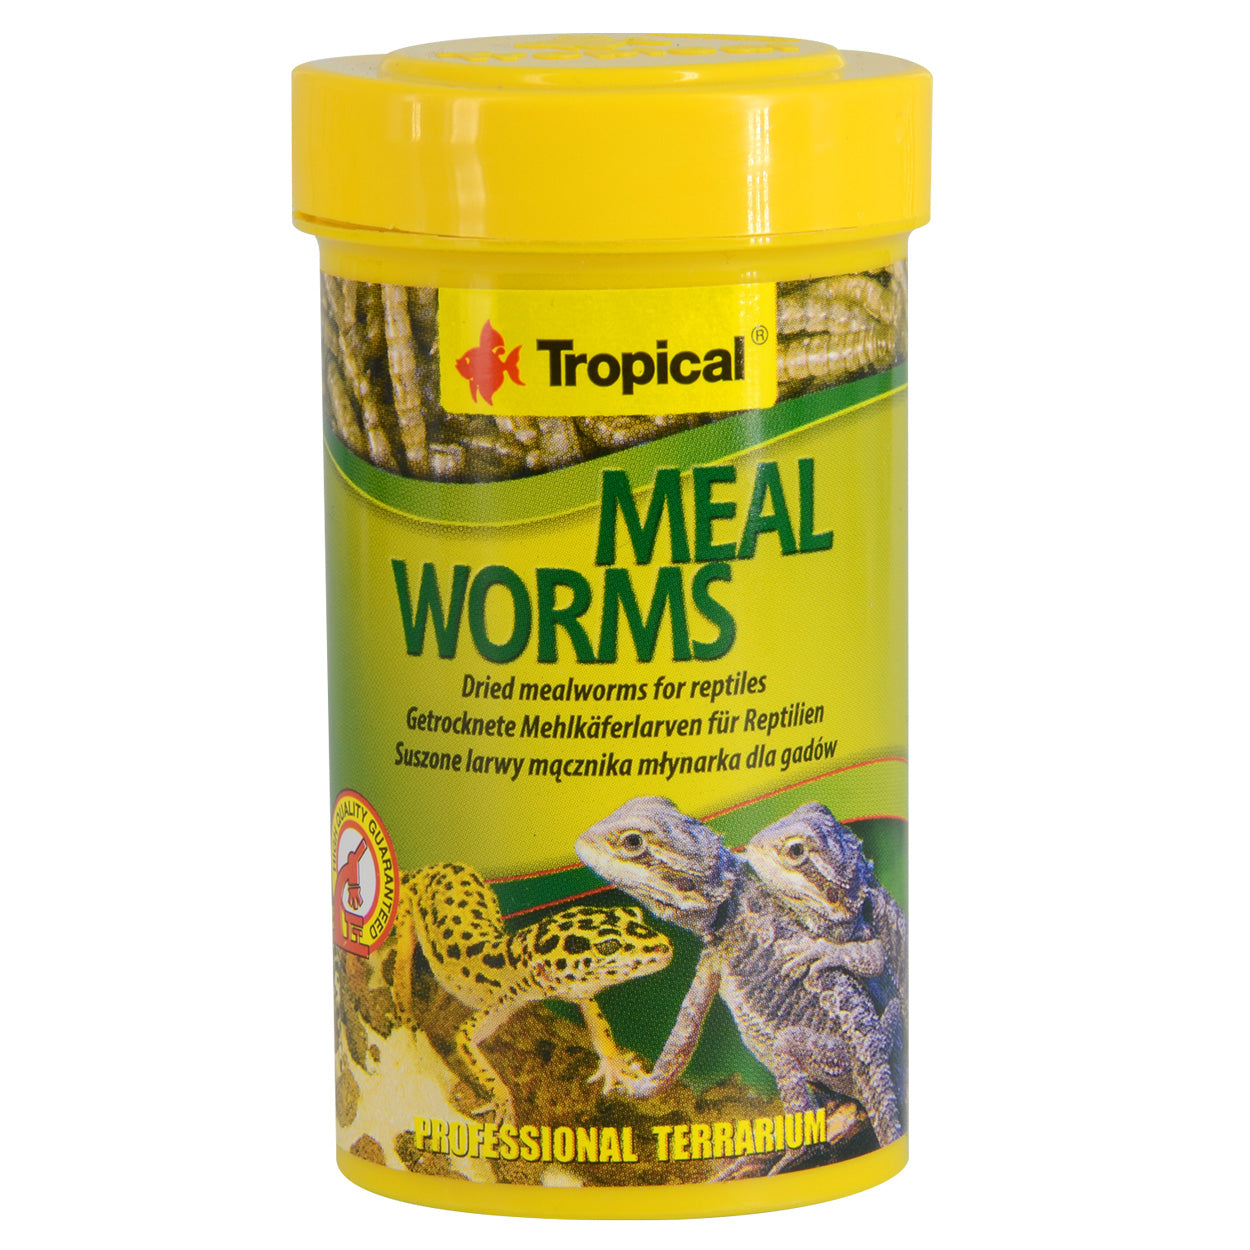 Tropical Dried Meal Worms